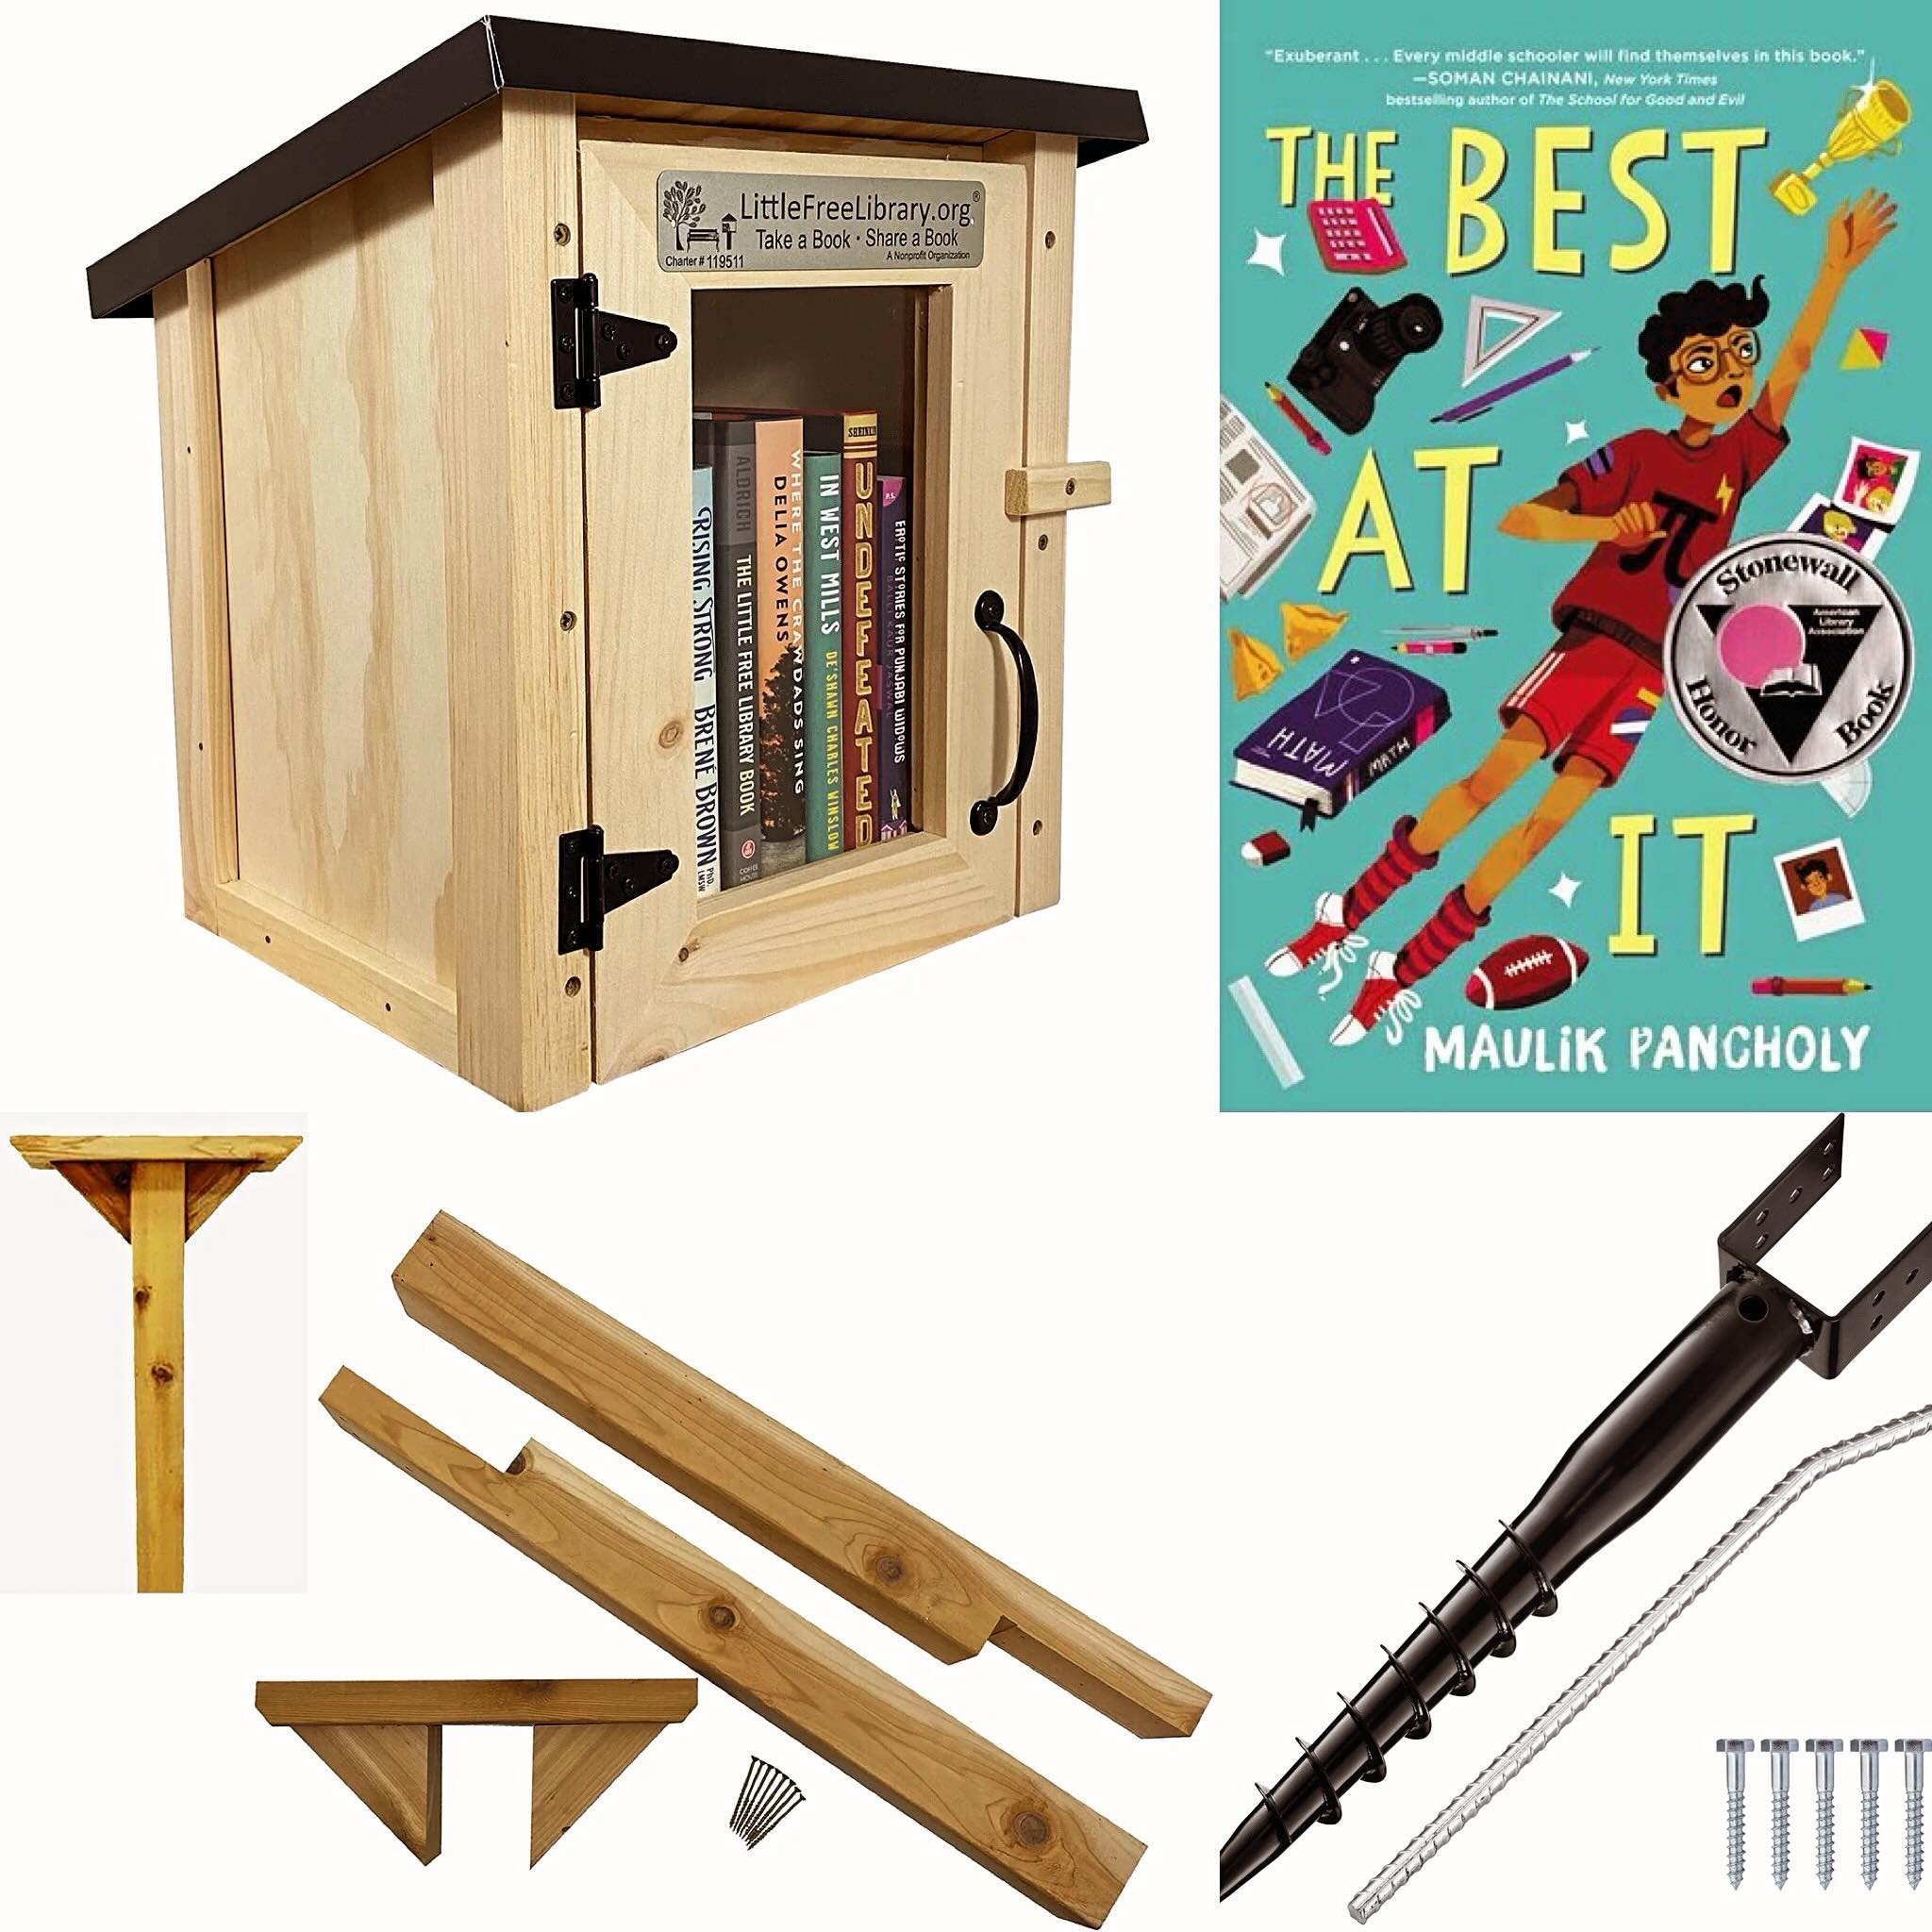 We need your help to get a Little Free Library! Can you help us reach our goal of $300 to purchase the materials shown above? We&rsquo;re also featuring books by  @maulikpancholy in our first round of books and music to share with the community! 📚 ?